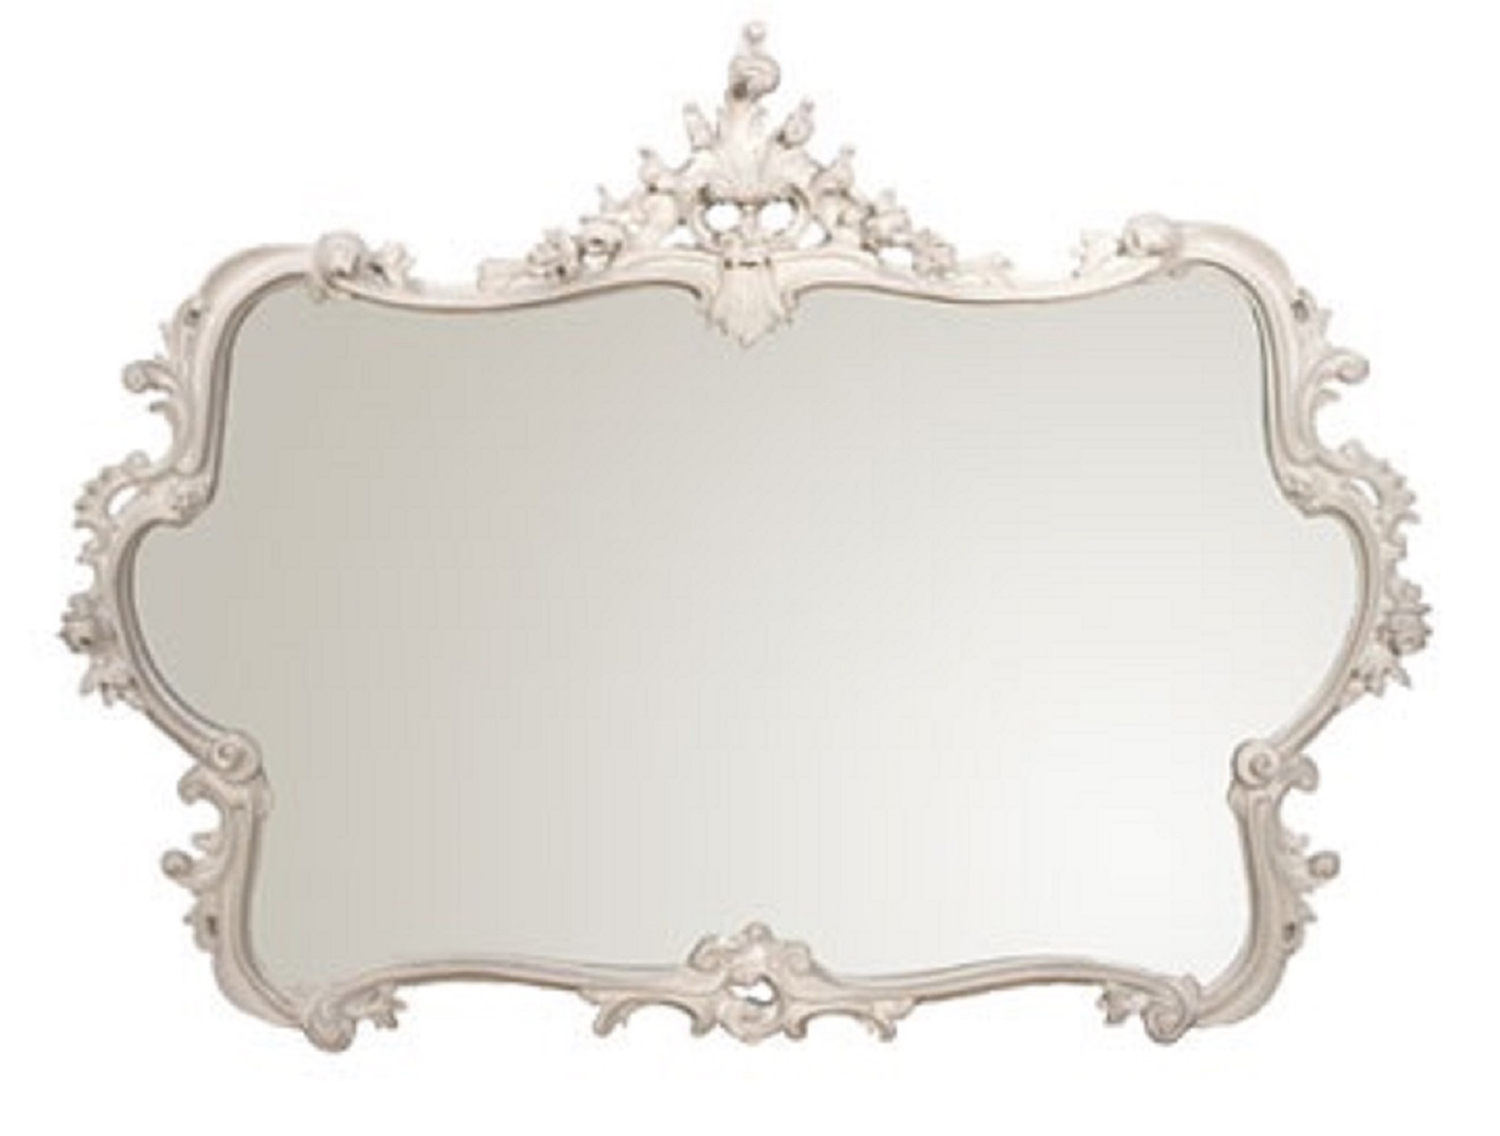 Miss Lala's White Looking Glass - cutout French wall mirror.jpg